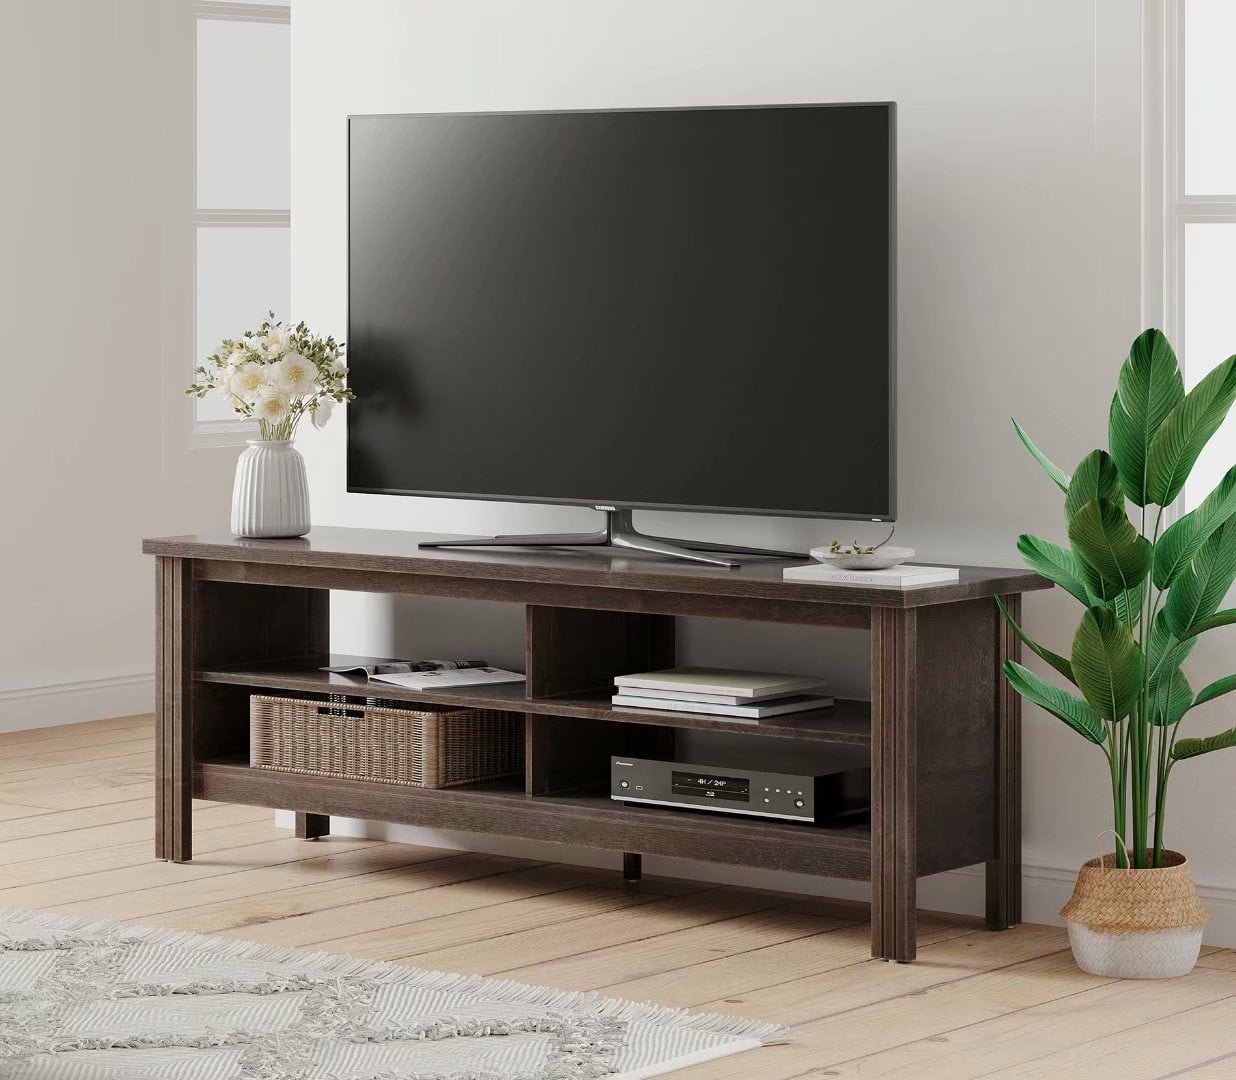 WAMPAT Farmhouse TV Stand for 65'' Flat Screen, Console ...